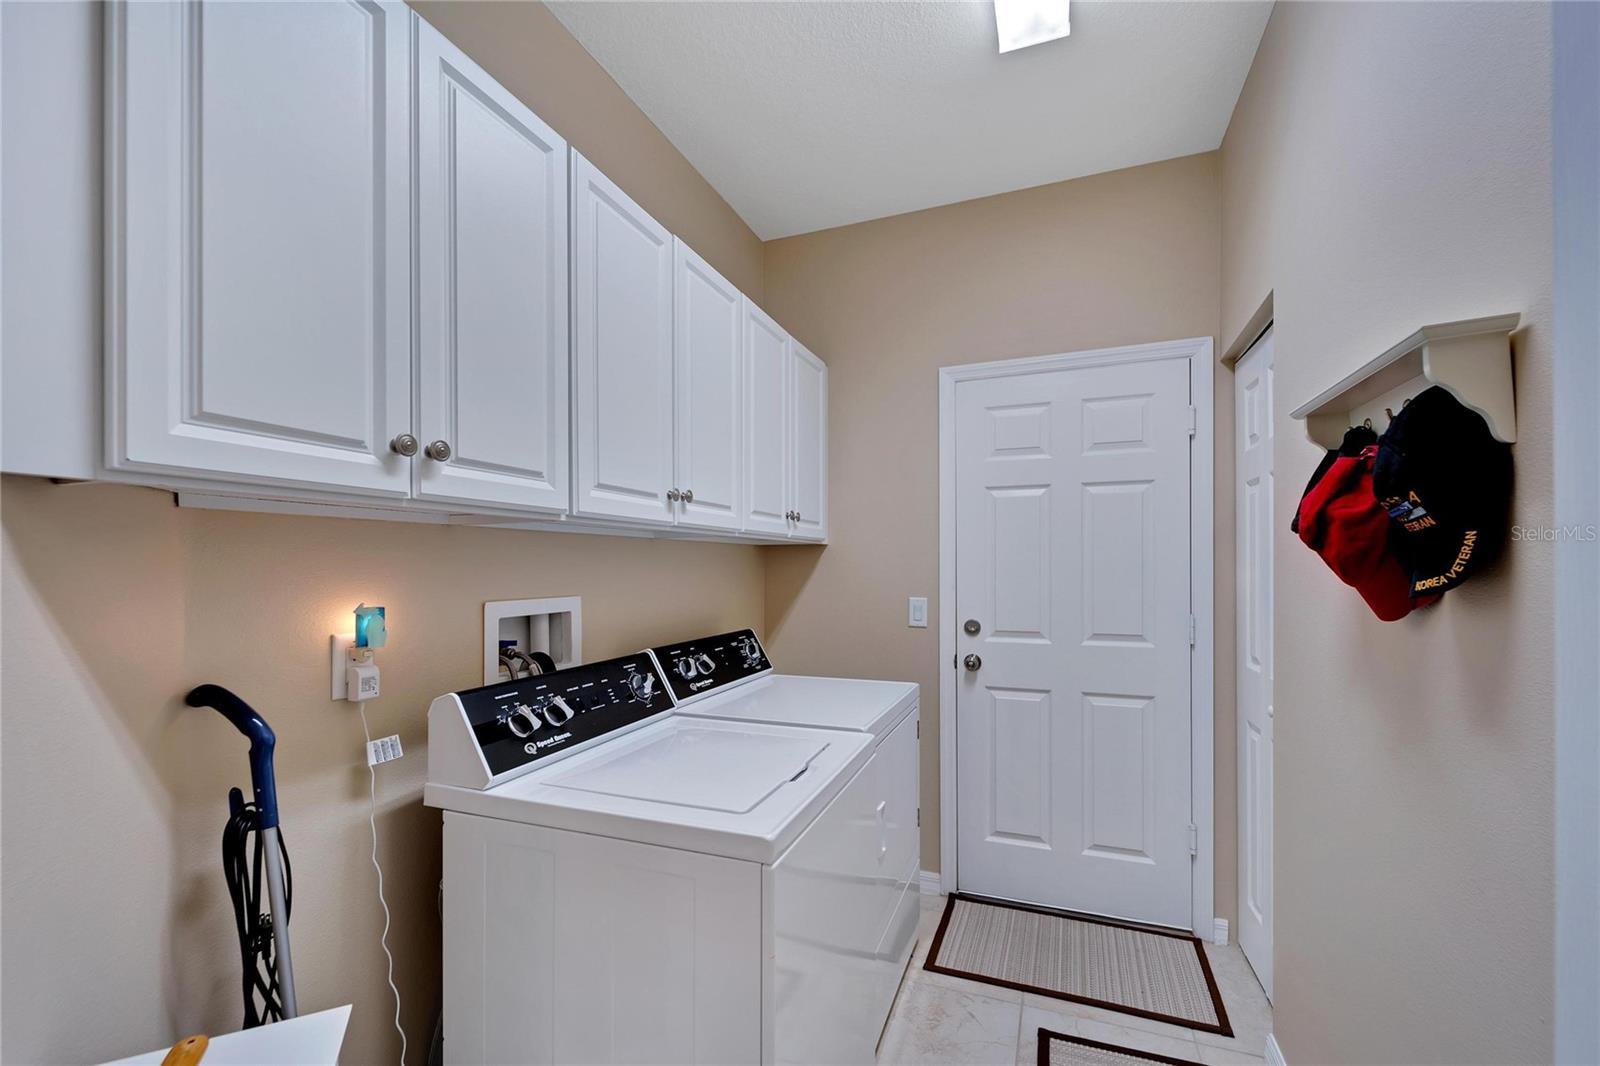 Interior Laundry Room with Wash Tub & Cabinets